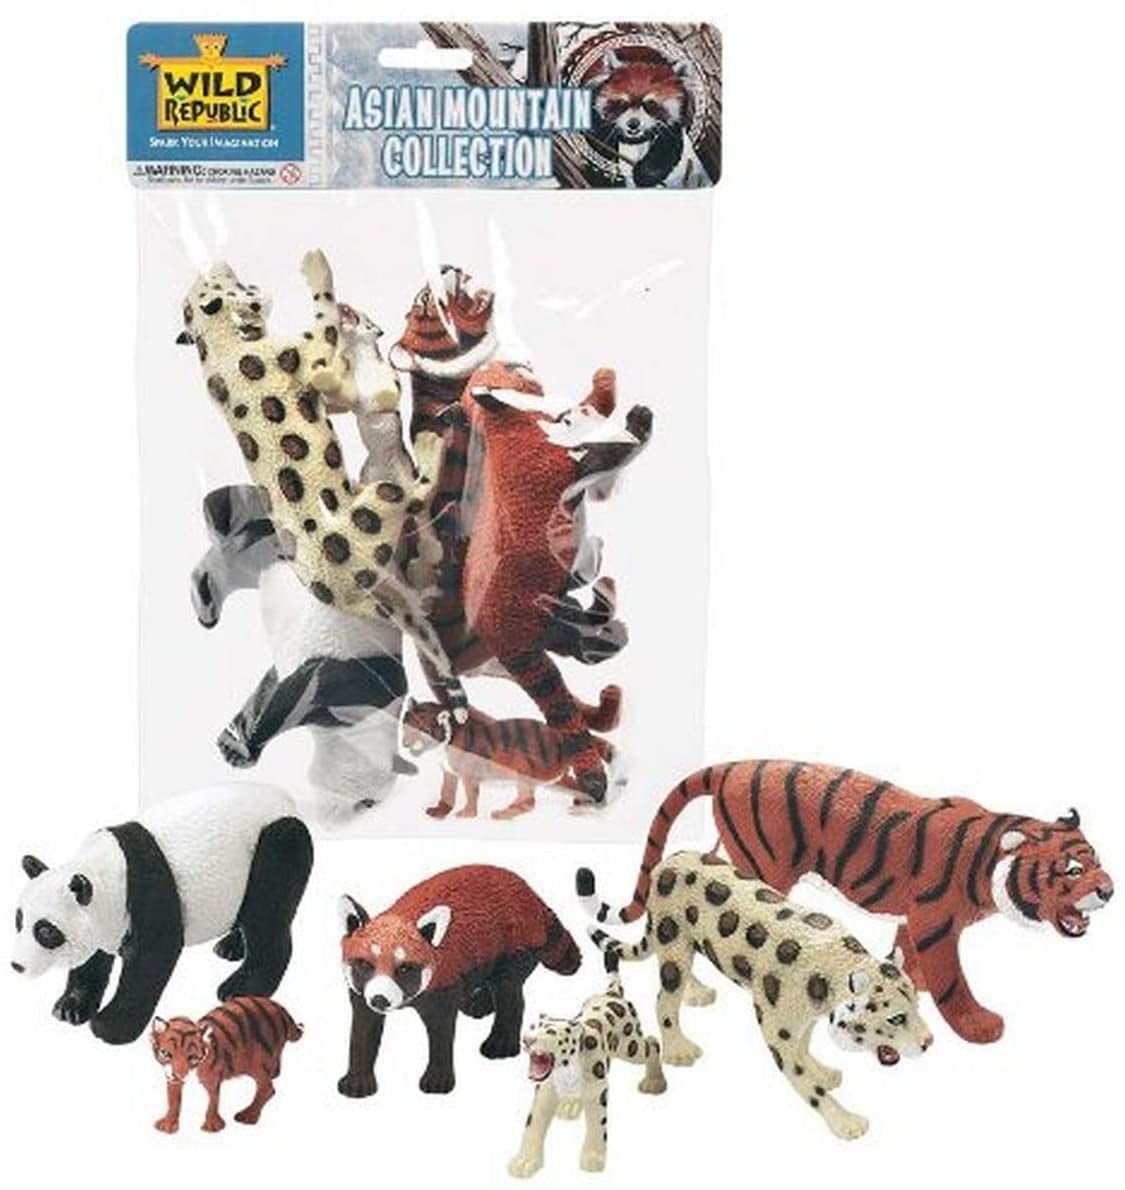 Wild Republic Large Polybag Wilderness Collection Animal Play Set toy Figurines 